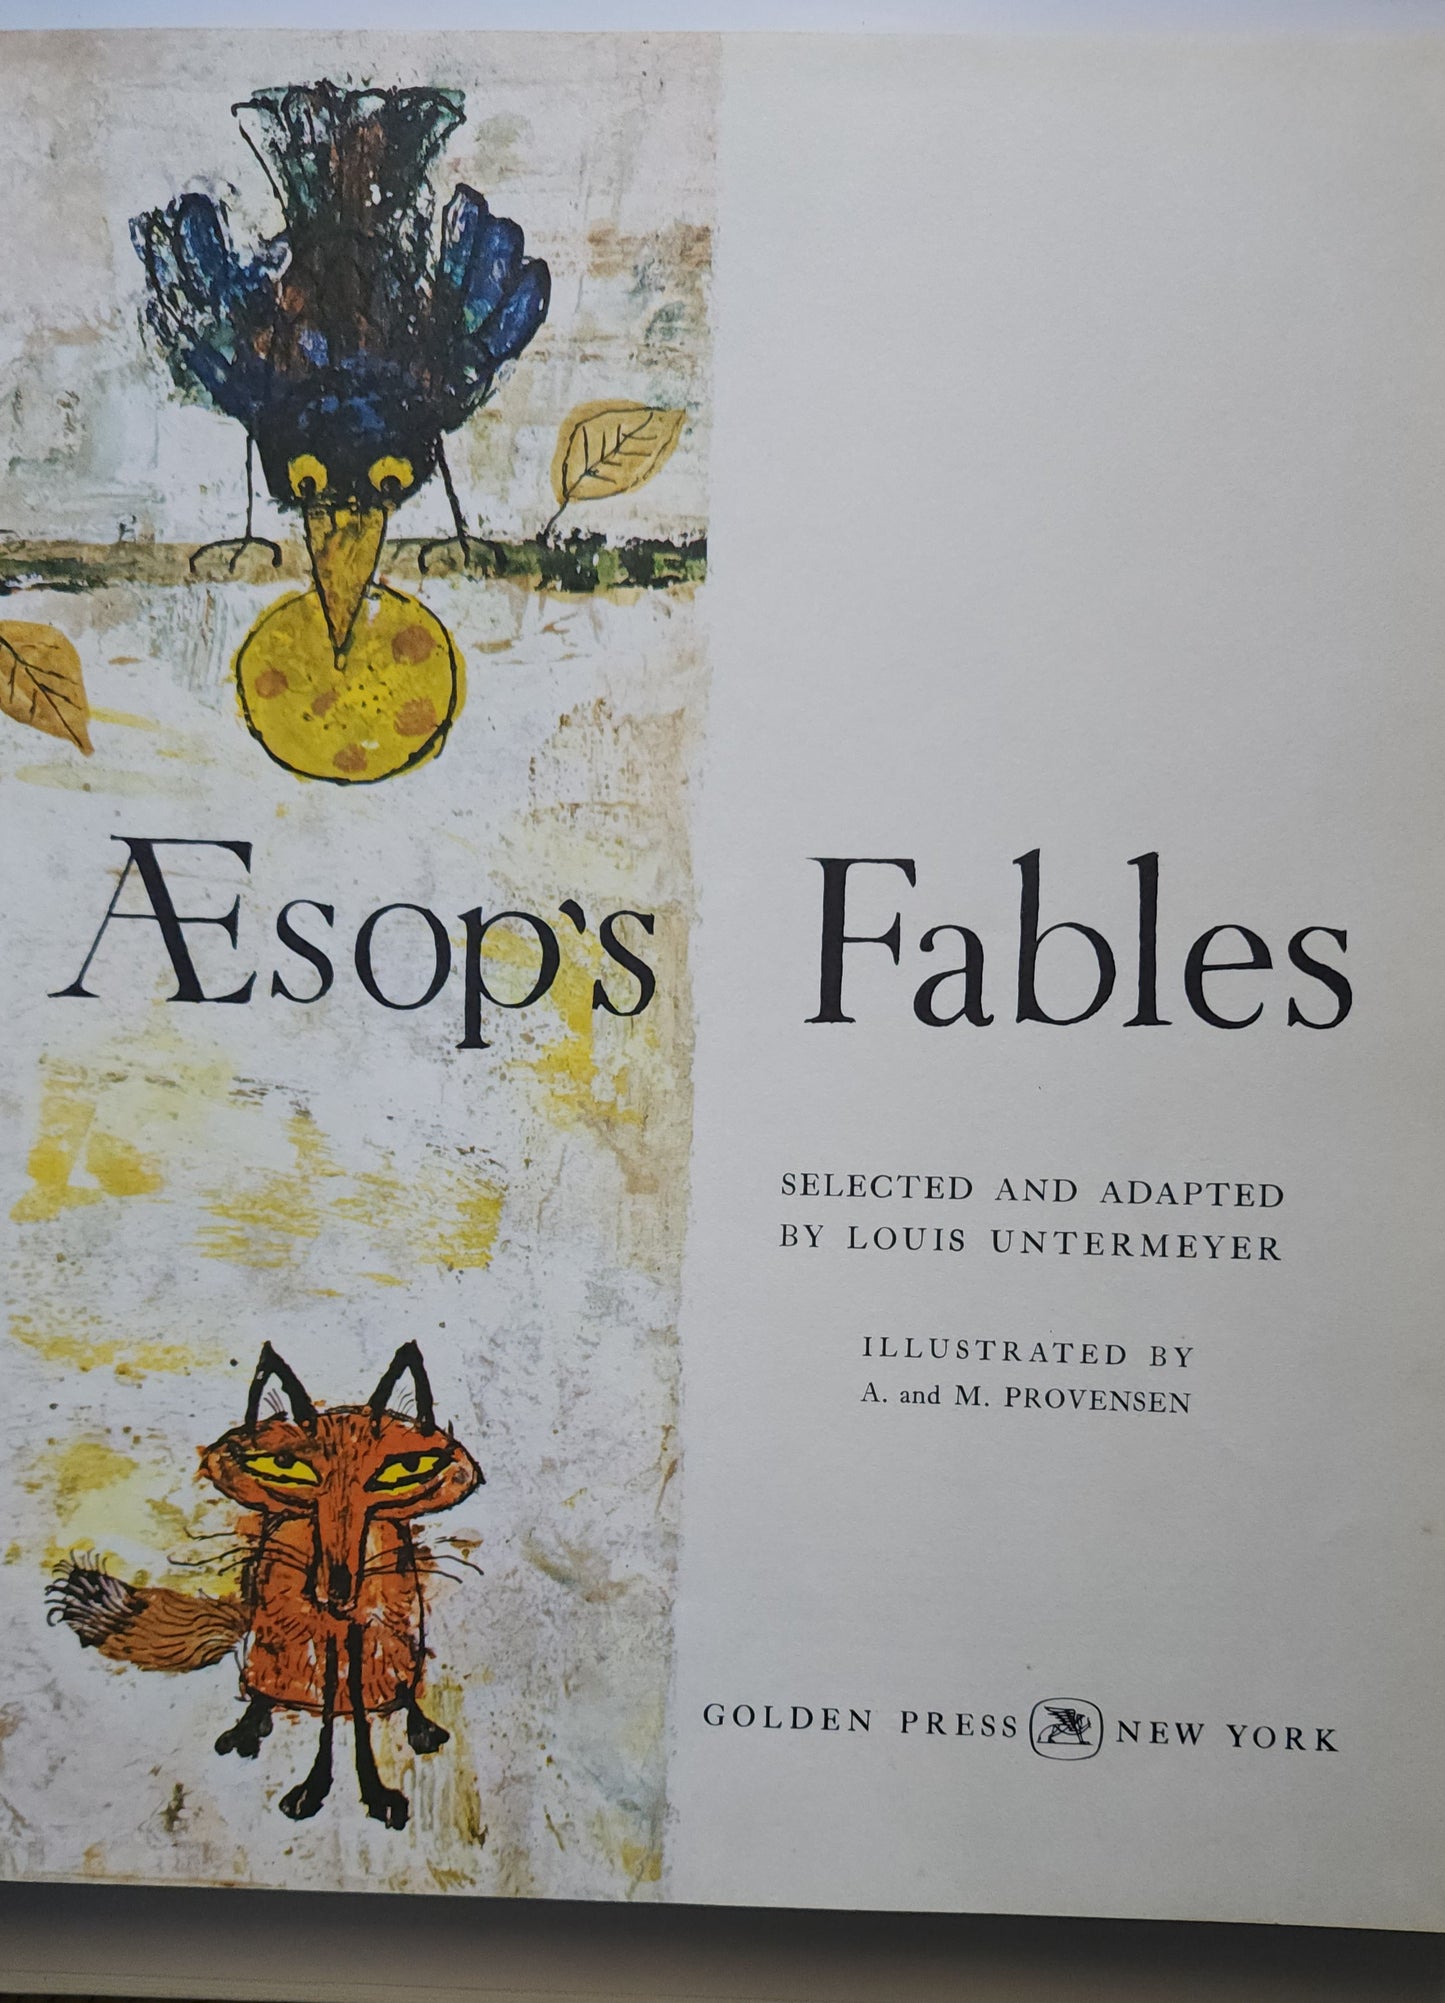 Aesop's Fables: A Giant Golden Book Louis Untermeyer illuatrated by A & M Provensen hardcover 1965